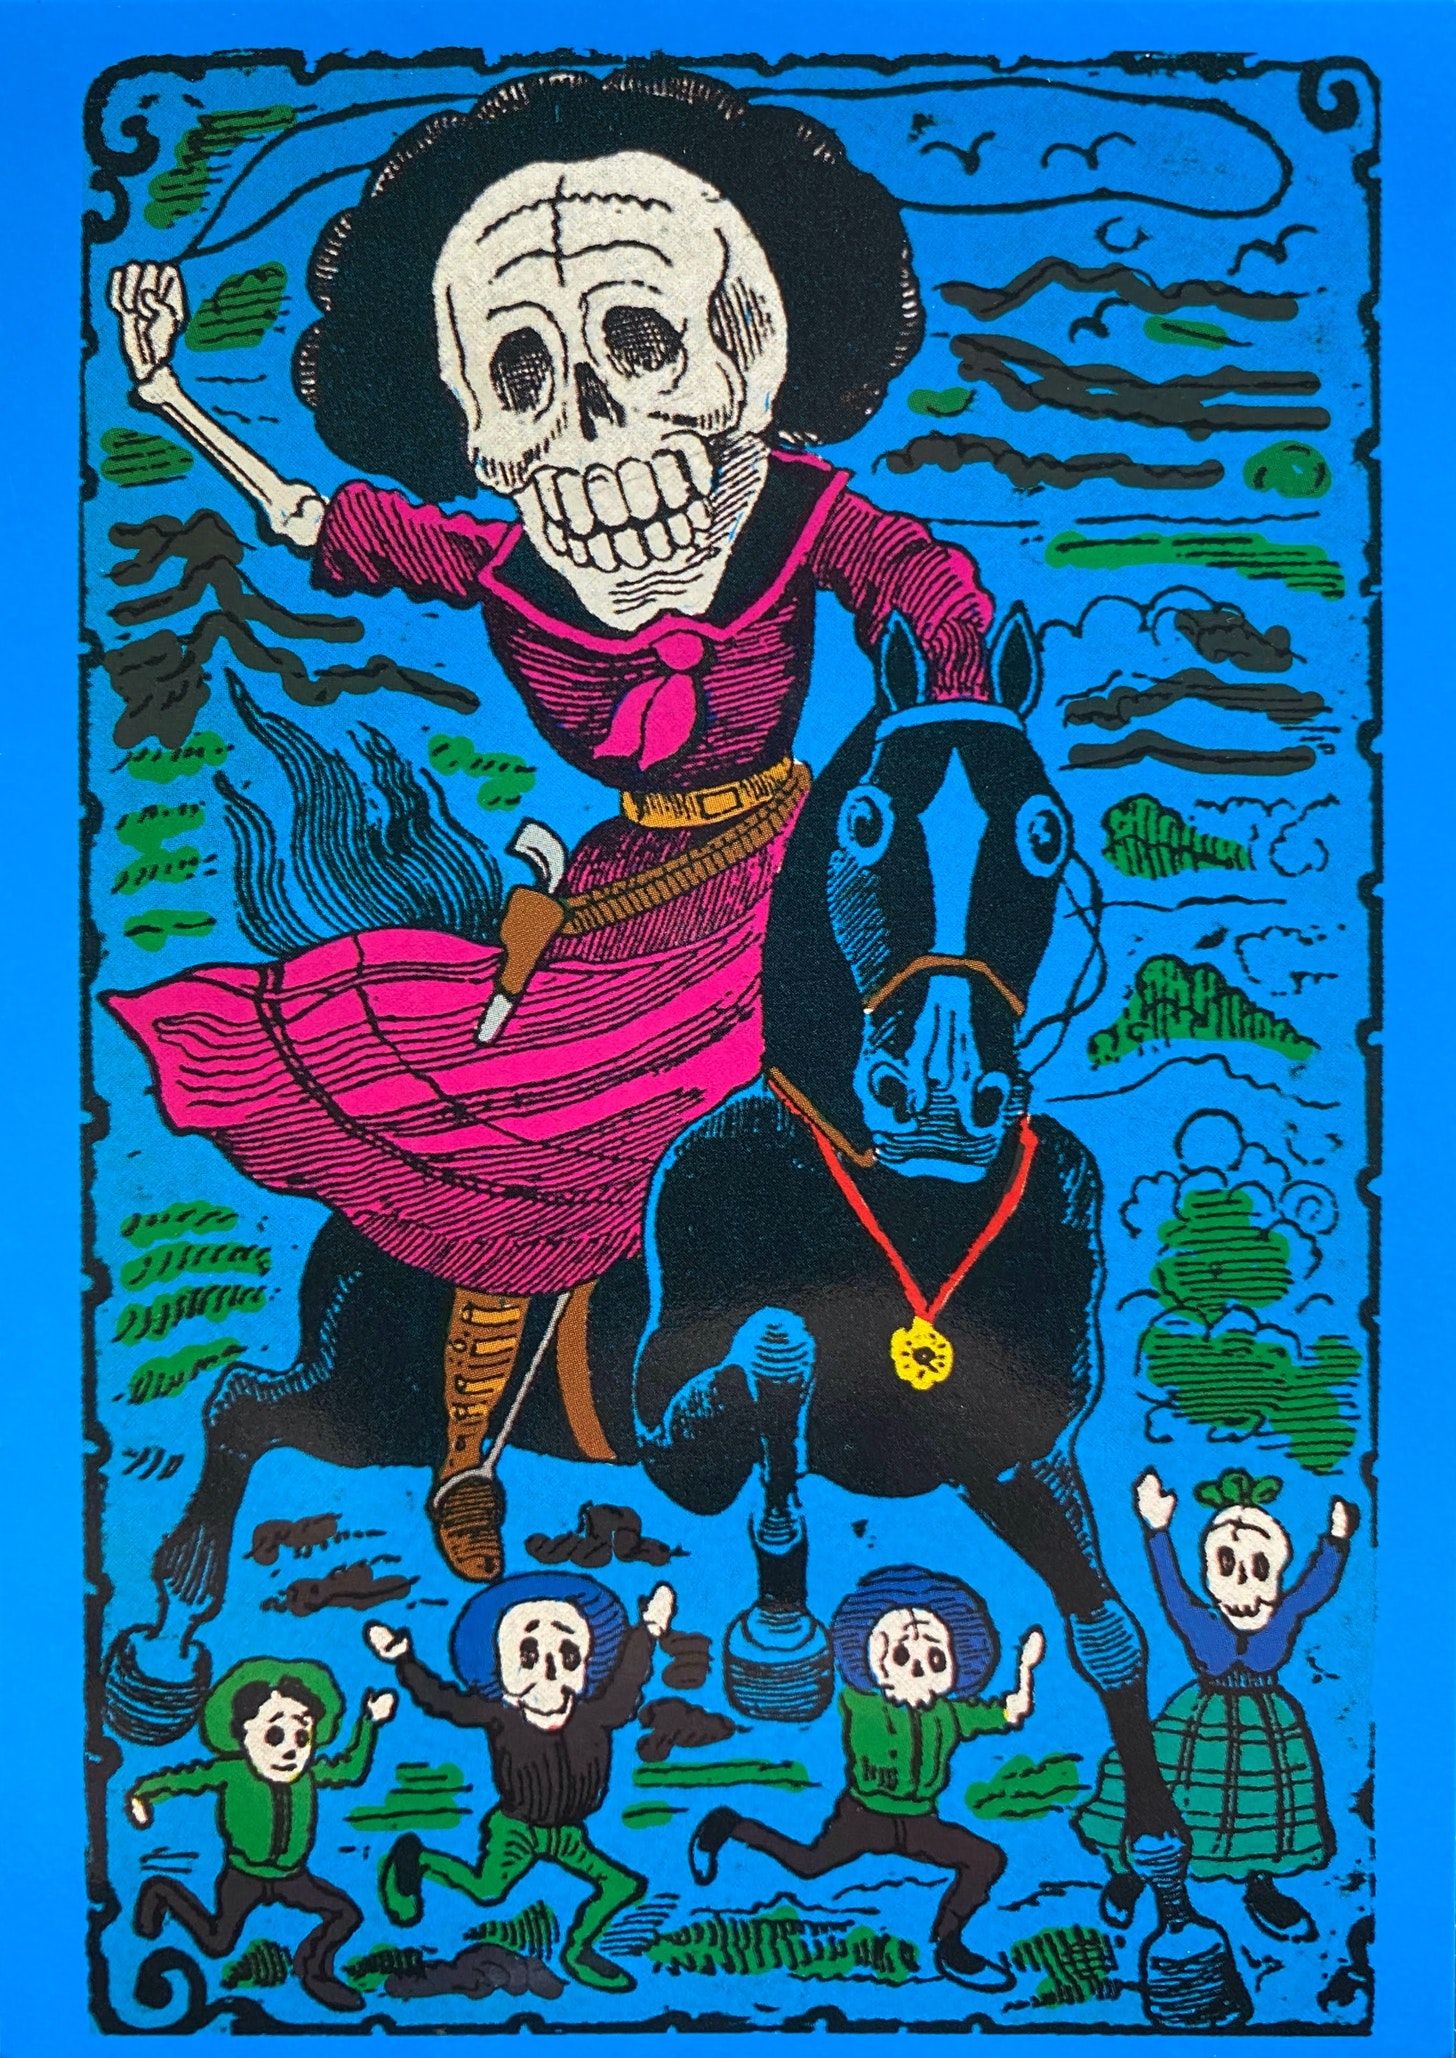 A skeleton wearing a dress with a holster on their hip with a revolver, while riding a black horse with a medal on it’s chest. The rider is cheered by 4 skeletons, with their arms raised.